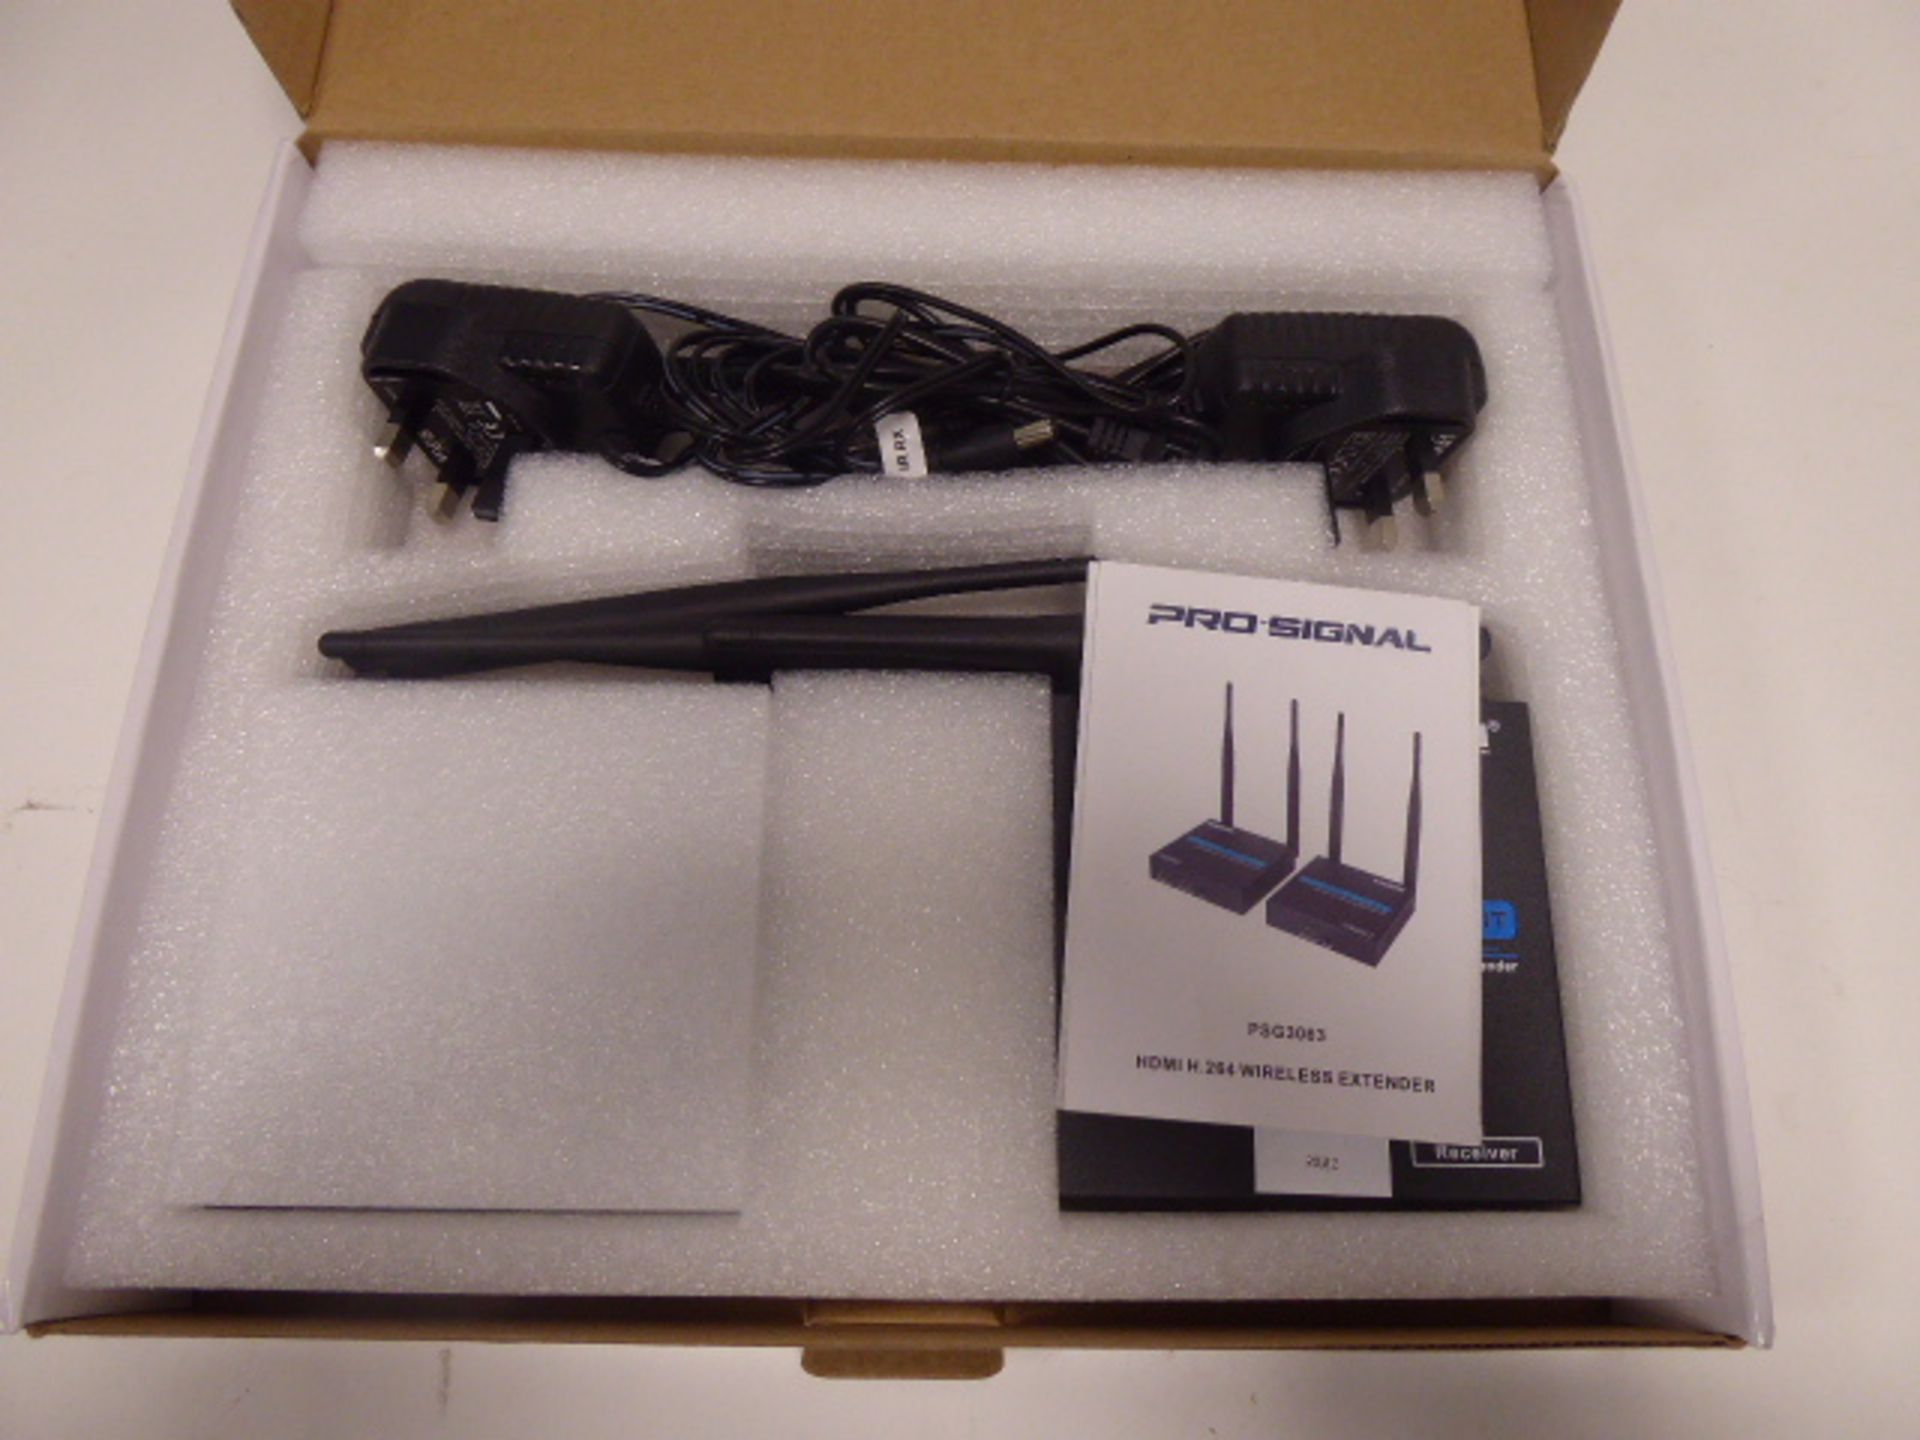 HDMI h264 wireless extender kit with box - Image 2 of 2